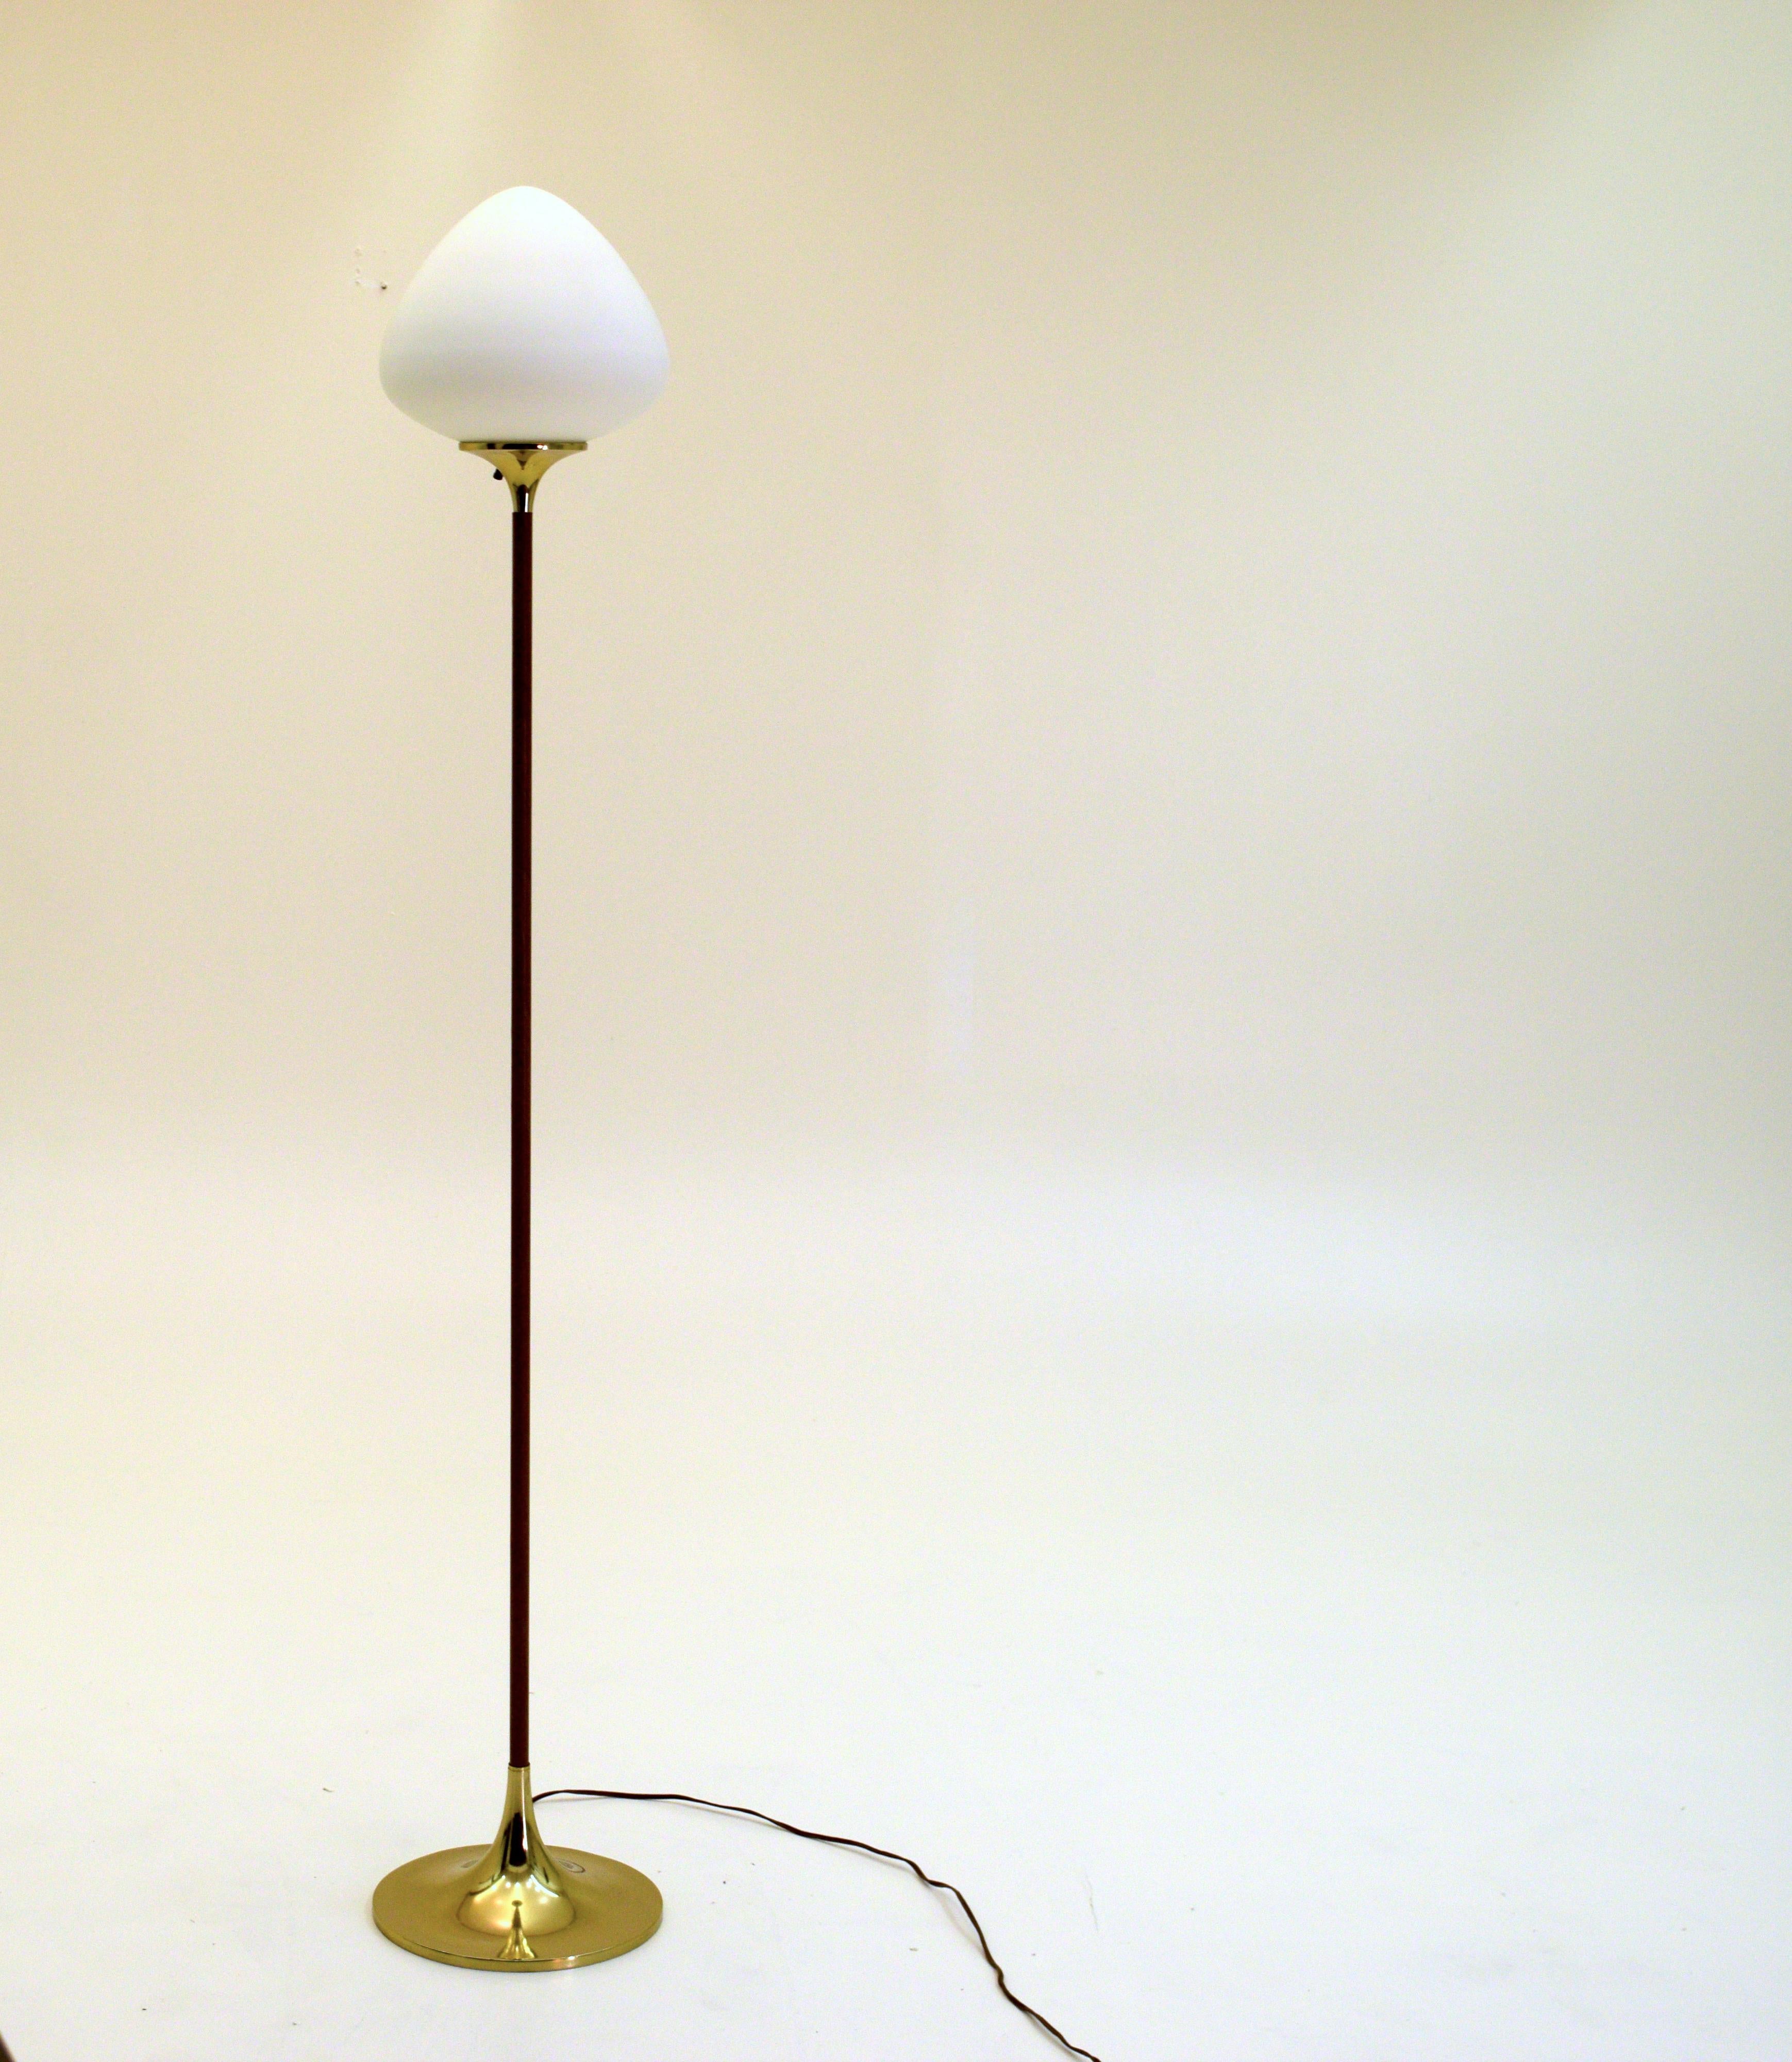 Laurel Lighting, circa 1959, USA
Bill Curry Design
Brass, walnut and opaline glass.
57 tall x 10 inches round. Glass shade 9 inches wide.

A minimalist floor lamp by the Laurel Lamp Manufacturing company. In excellent condition with a trumpet styled